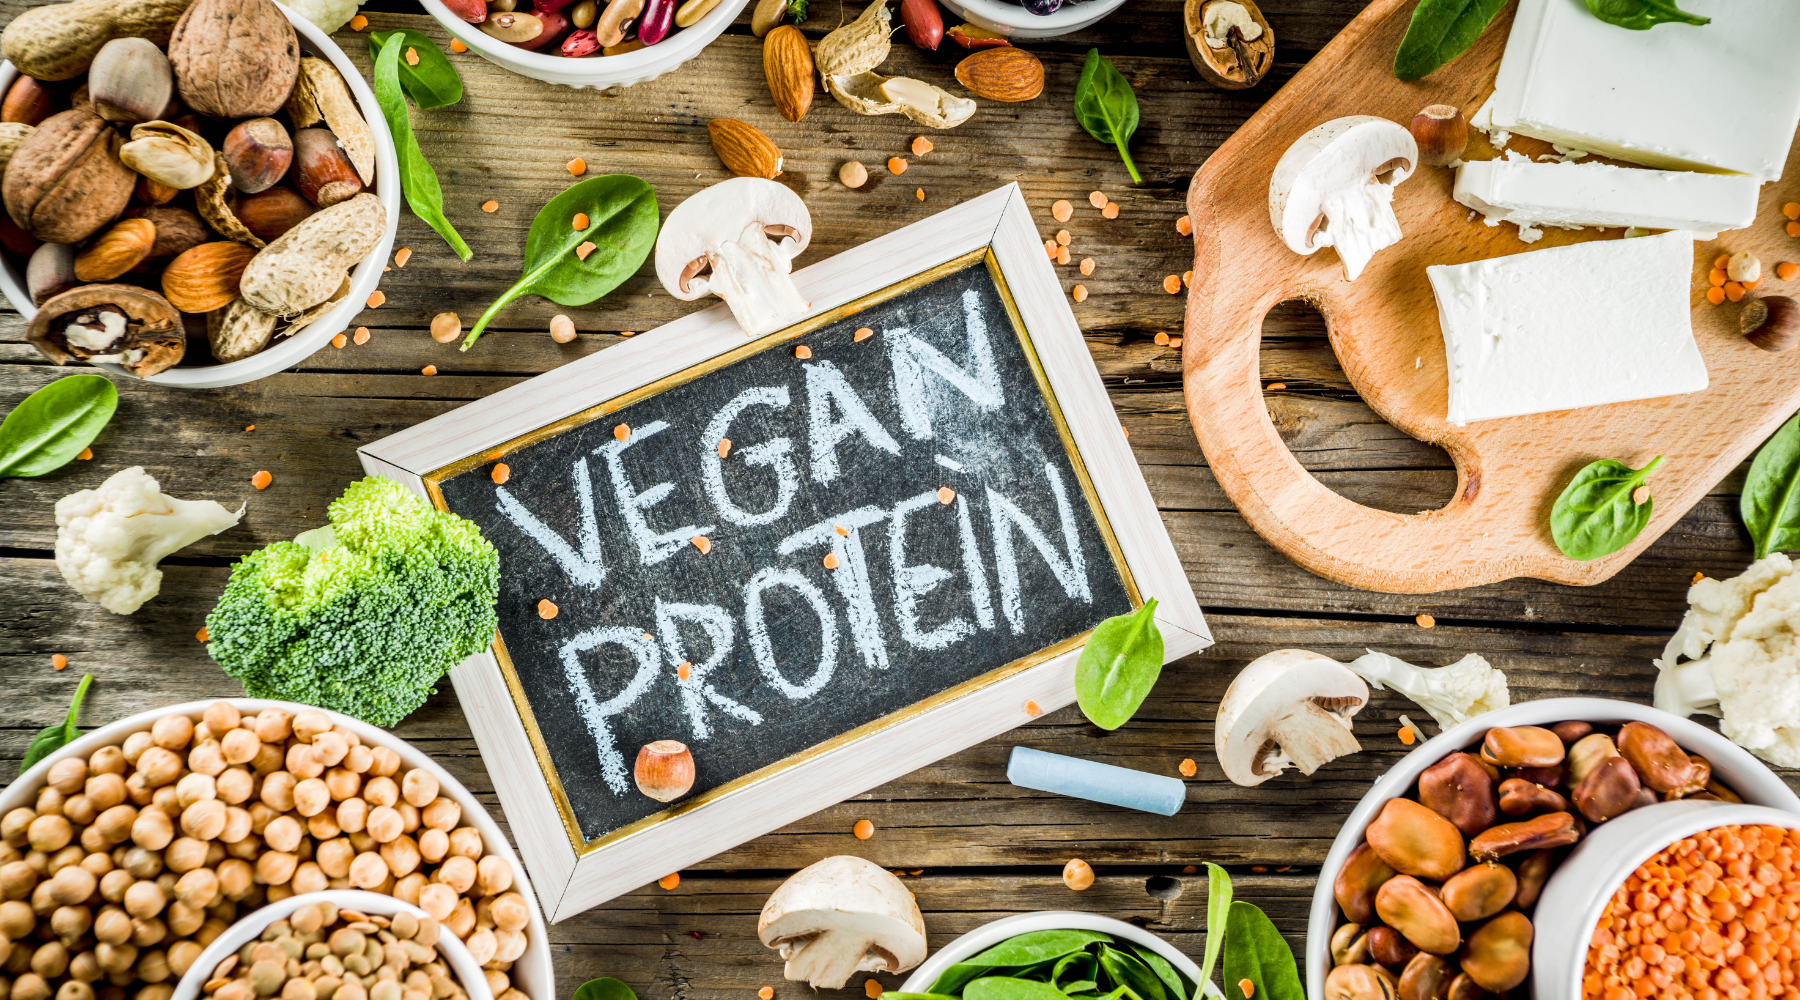 6 BENEFITS OF SWITCHING TO PLANT-BASED PROTEINS